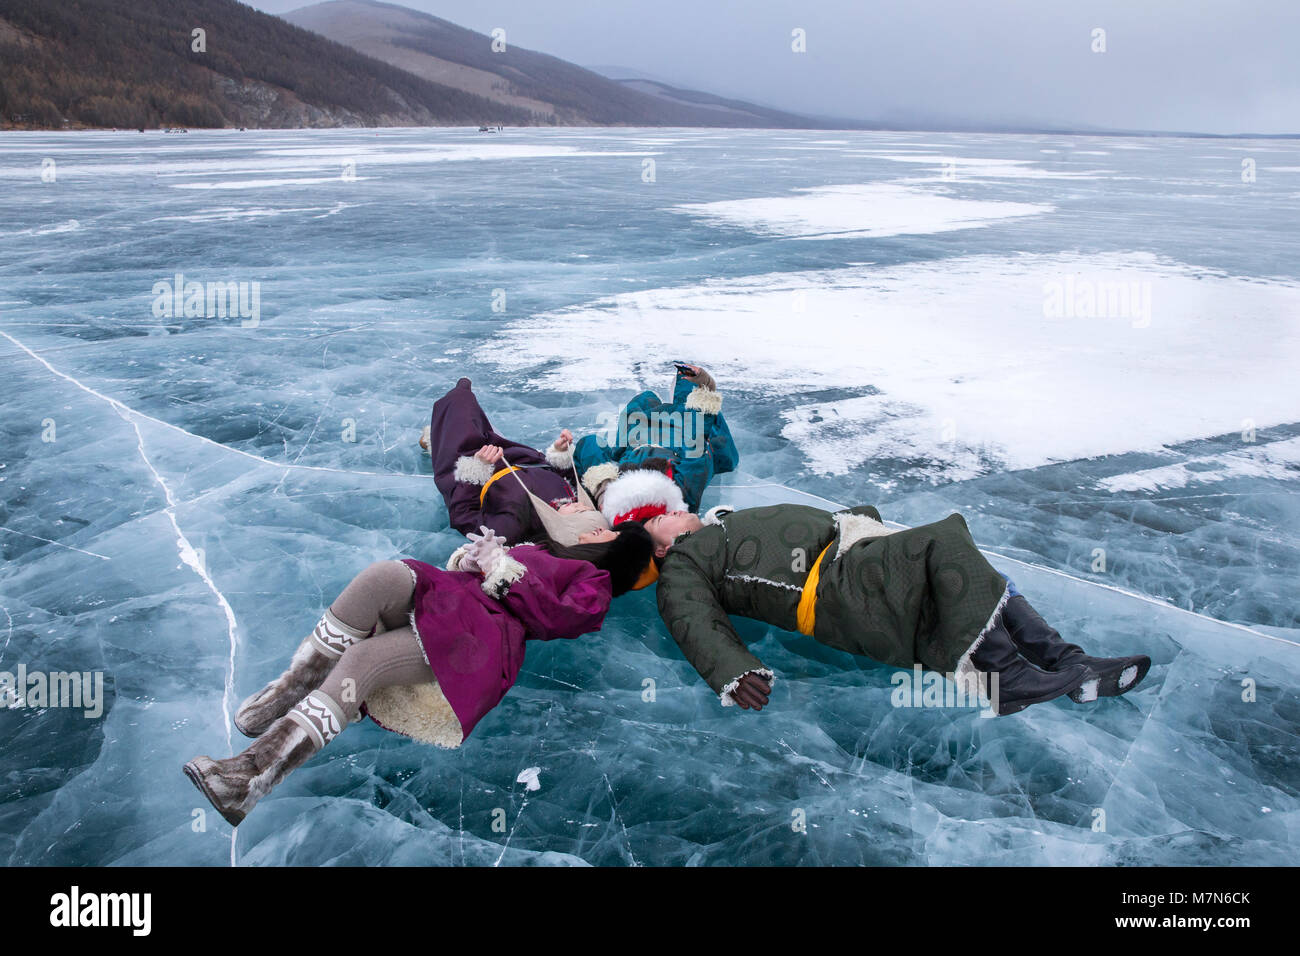 Hatgal, Mongolia, 3rd March 2018: mongolian young people  on a frozen lake Khuvsgul during a ice festival in winter Stock Photo